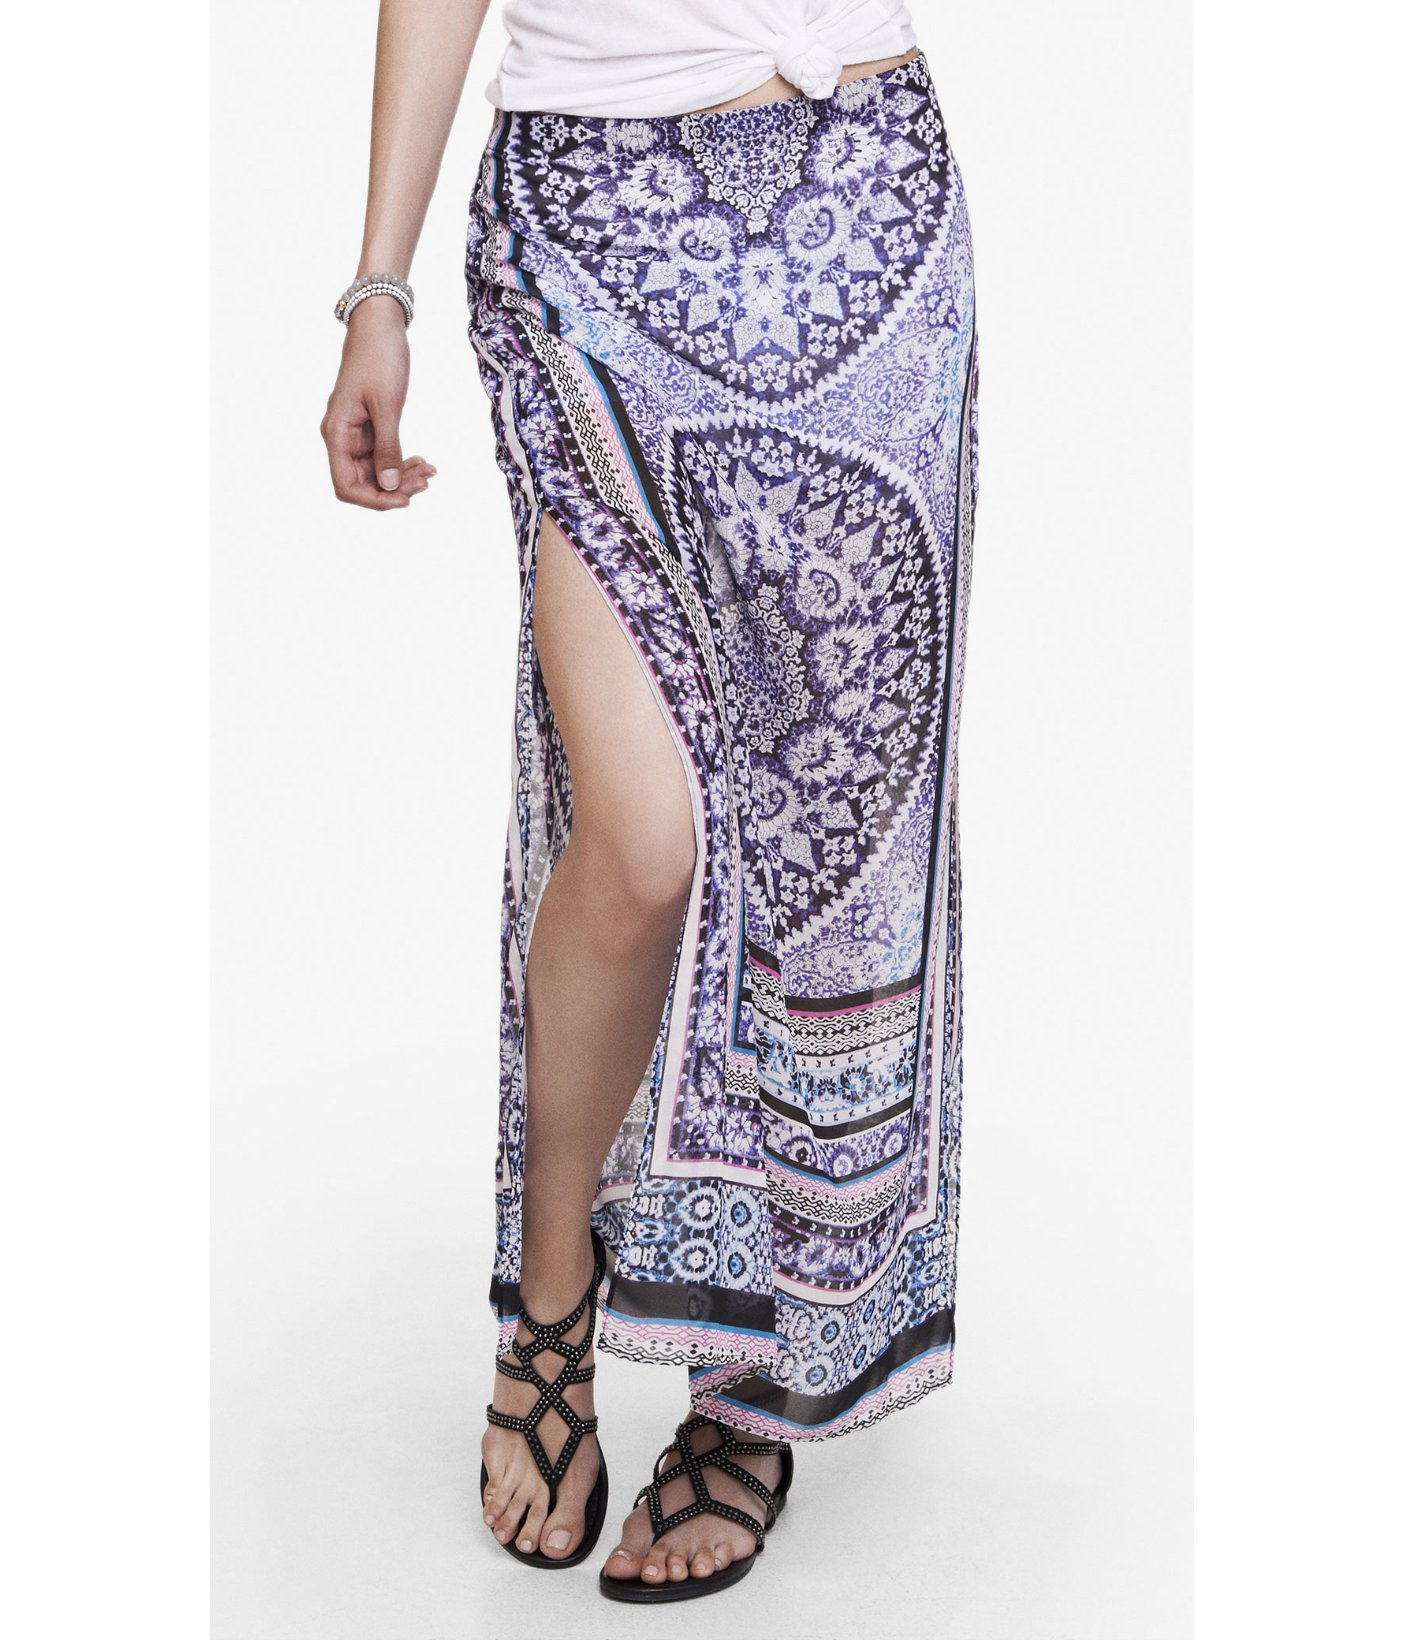 Express Tapestry Print Woven Maxi Skirt in Blue - Lyst